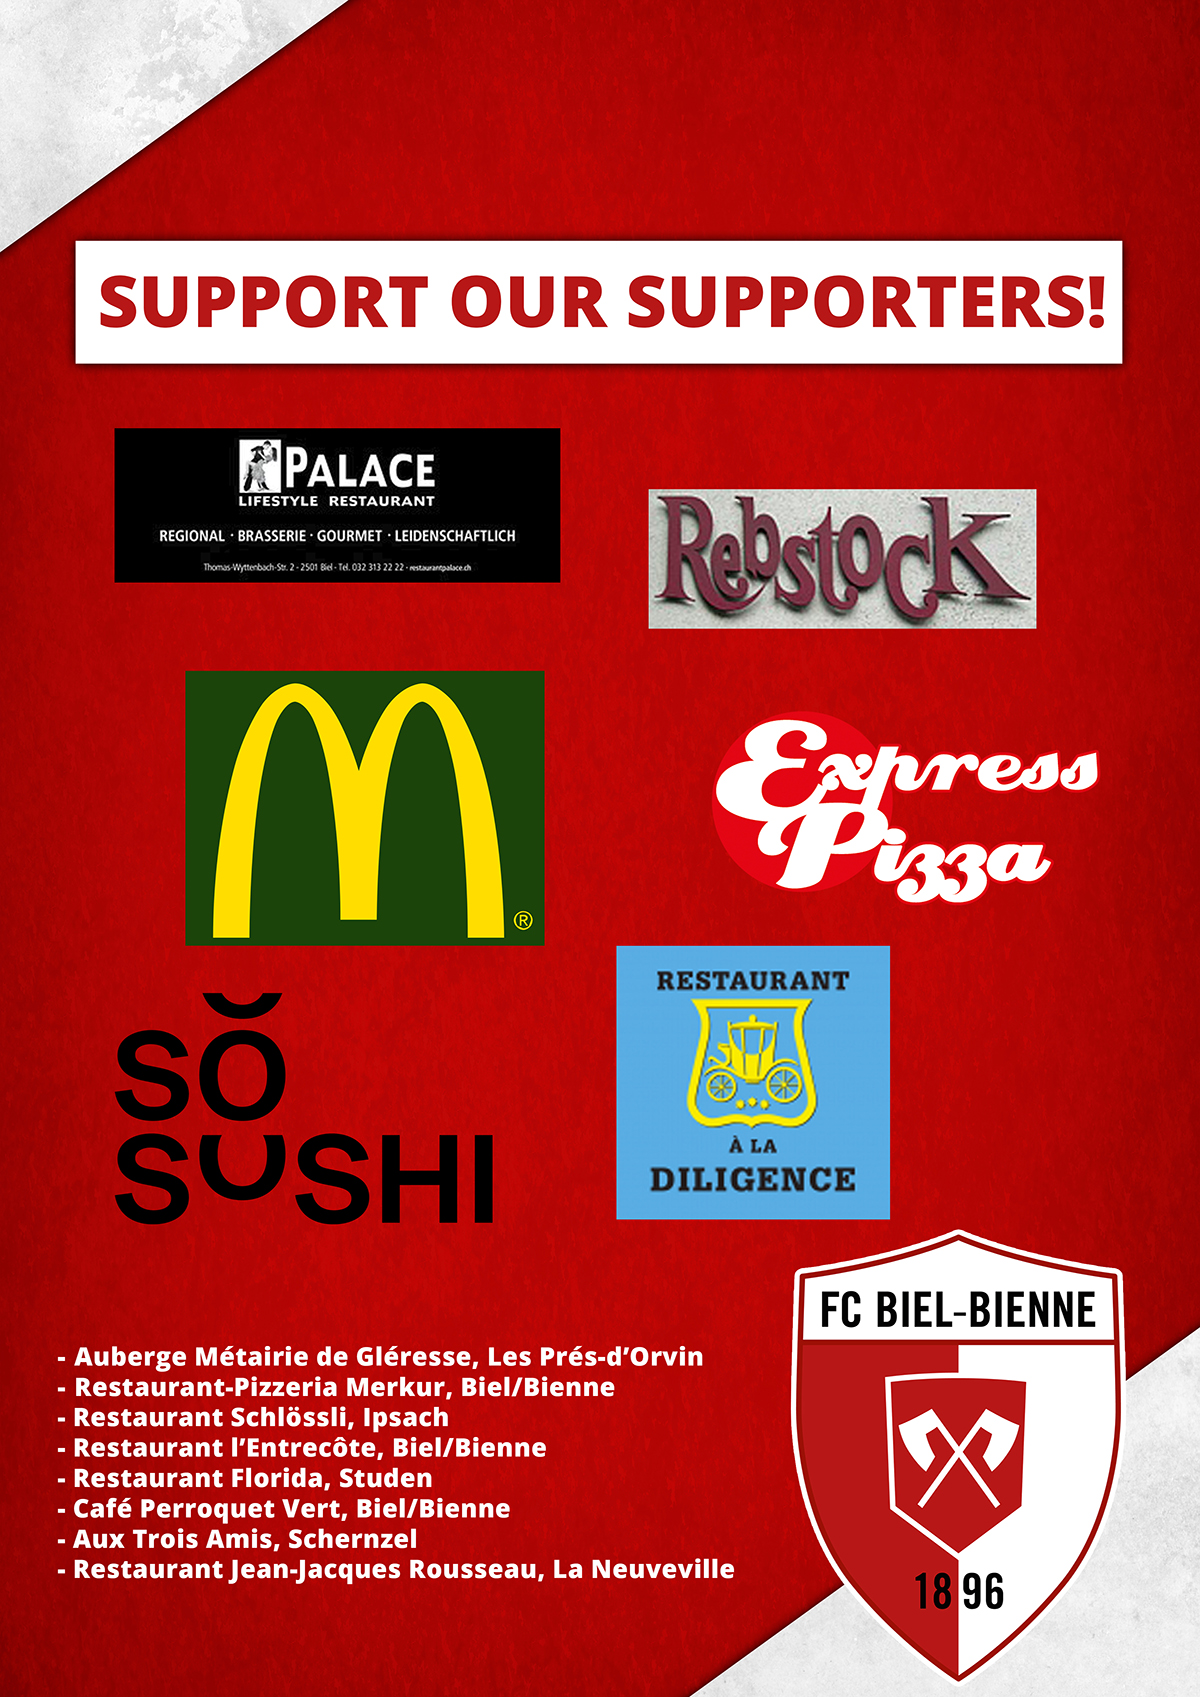 Support our Supporters!